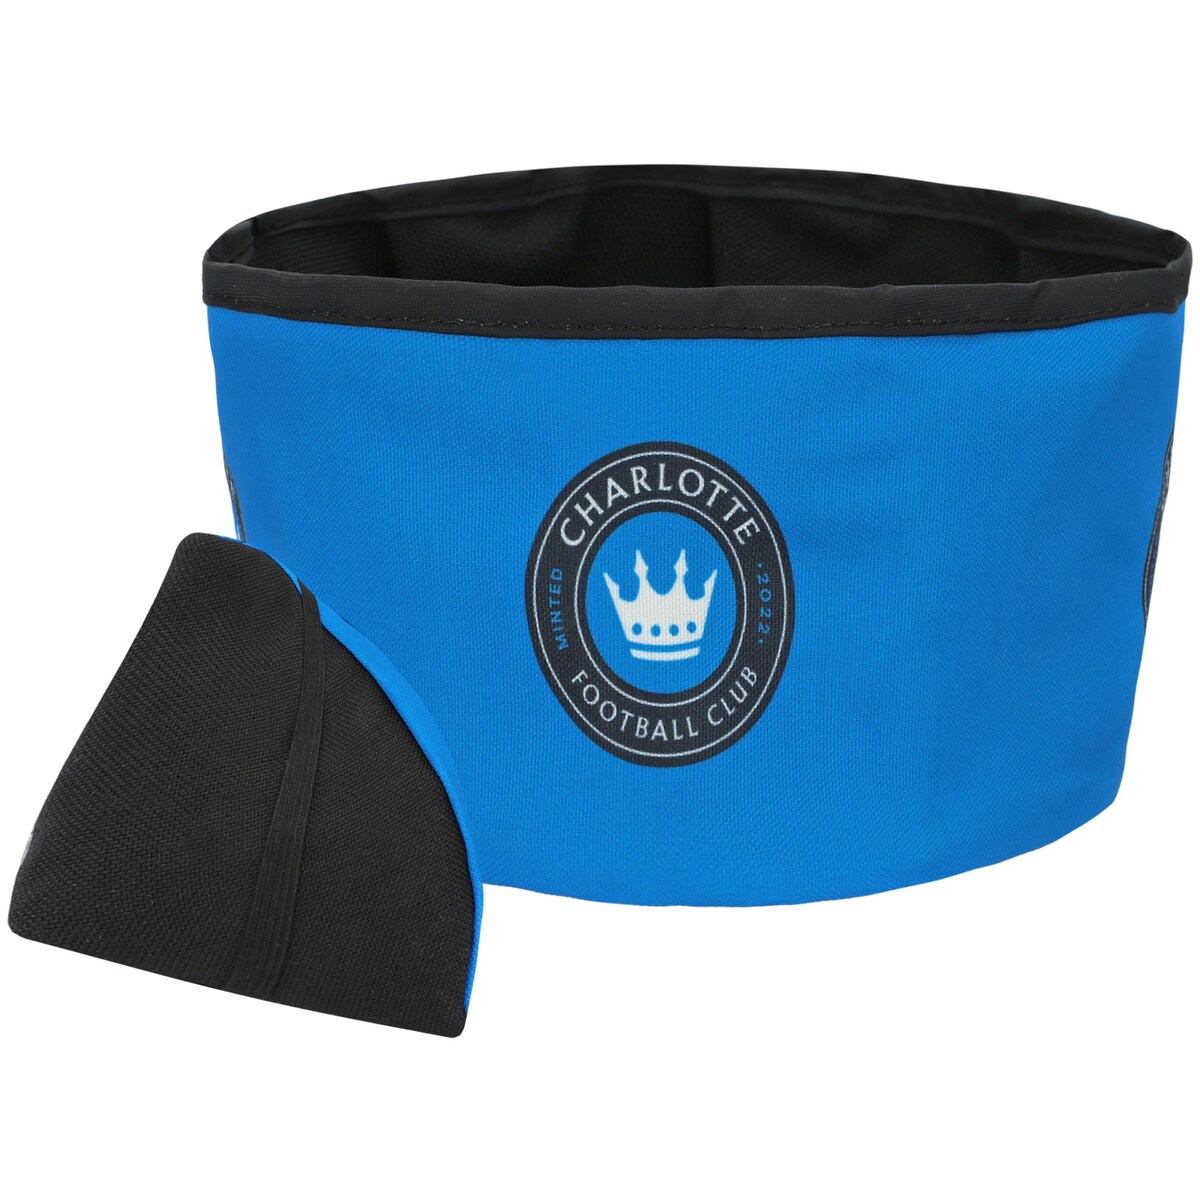 Ensure your four-legged Charlotte FC fan can stay hydrated and well fed when you're out and about with this Travel Collapsible bowl. It features an unmistakable Charlotte FC seal on the side, so everyone can see your pet has the same club spirit that you do.Wipe clean with a damp clothLined interiorMade in the USAOfficially licensedWater repellentElastic bandBrand: All Star DogsBinding trimmed topPrinted graphicsMeasures approx. 8''